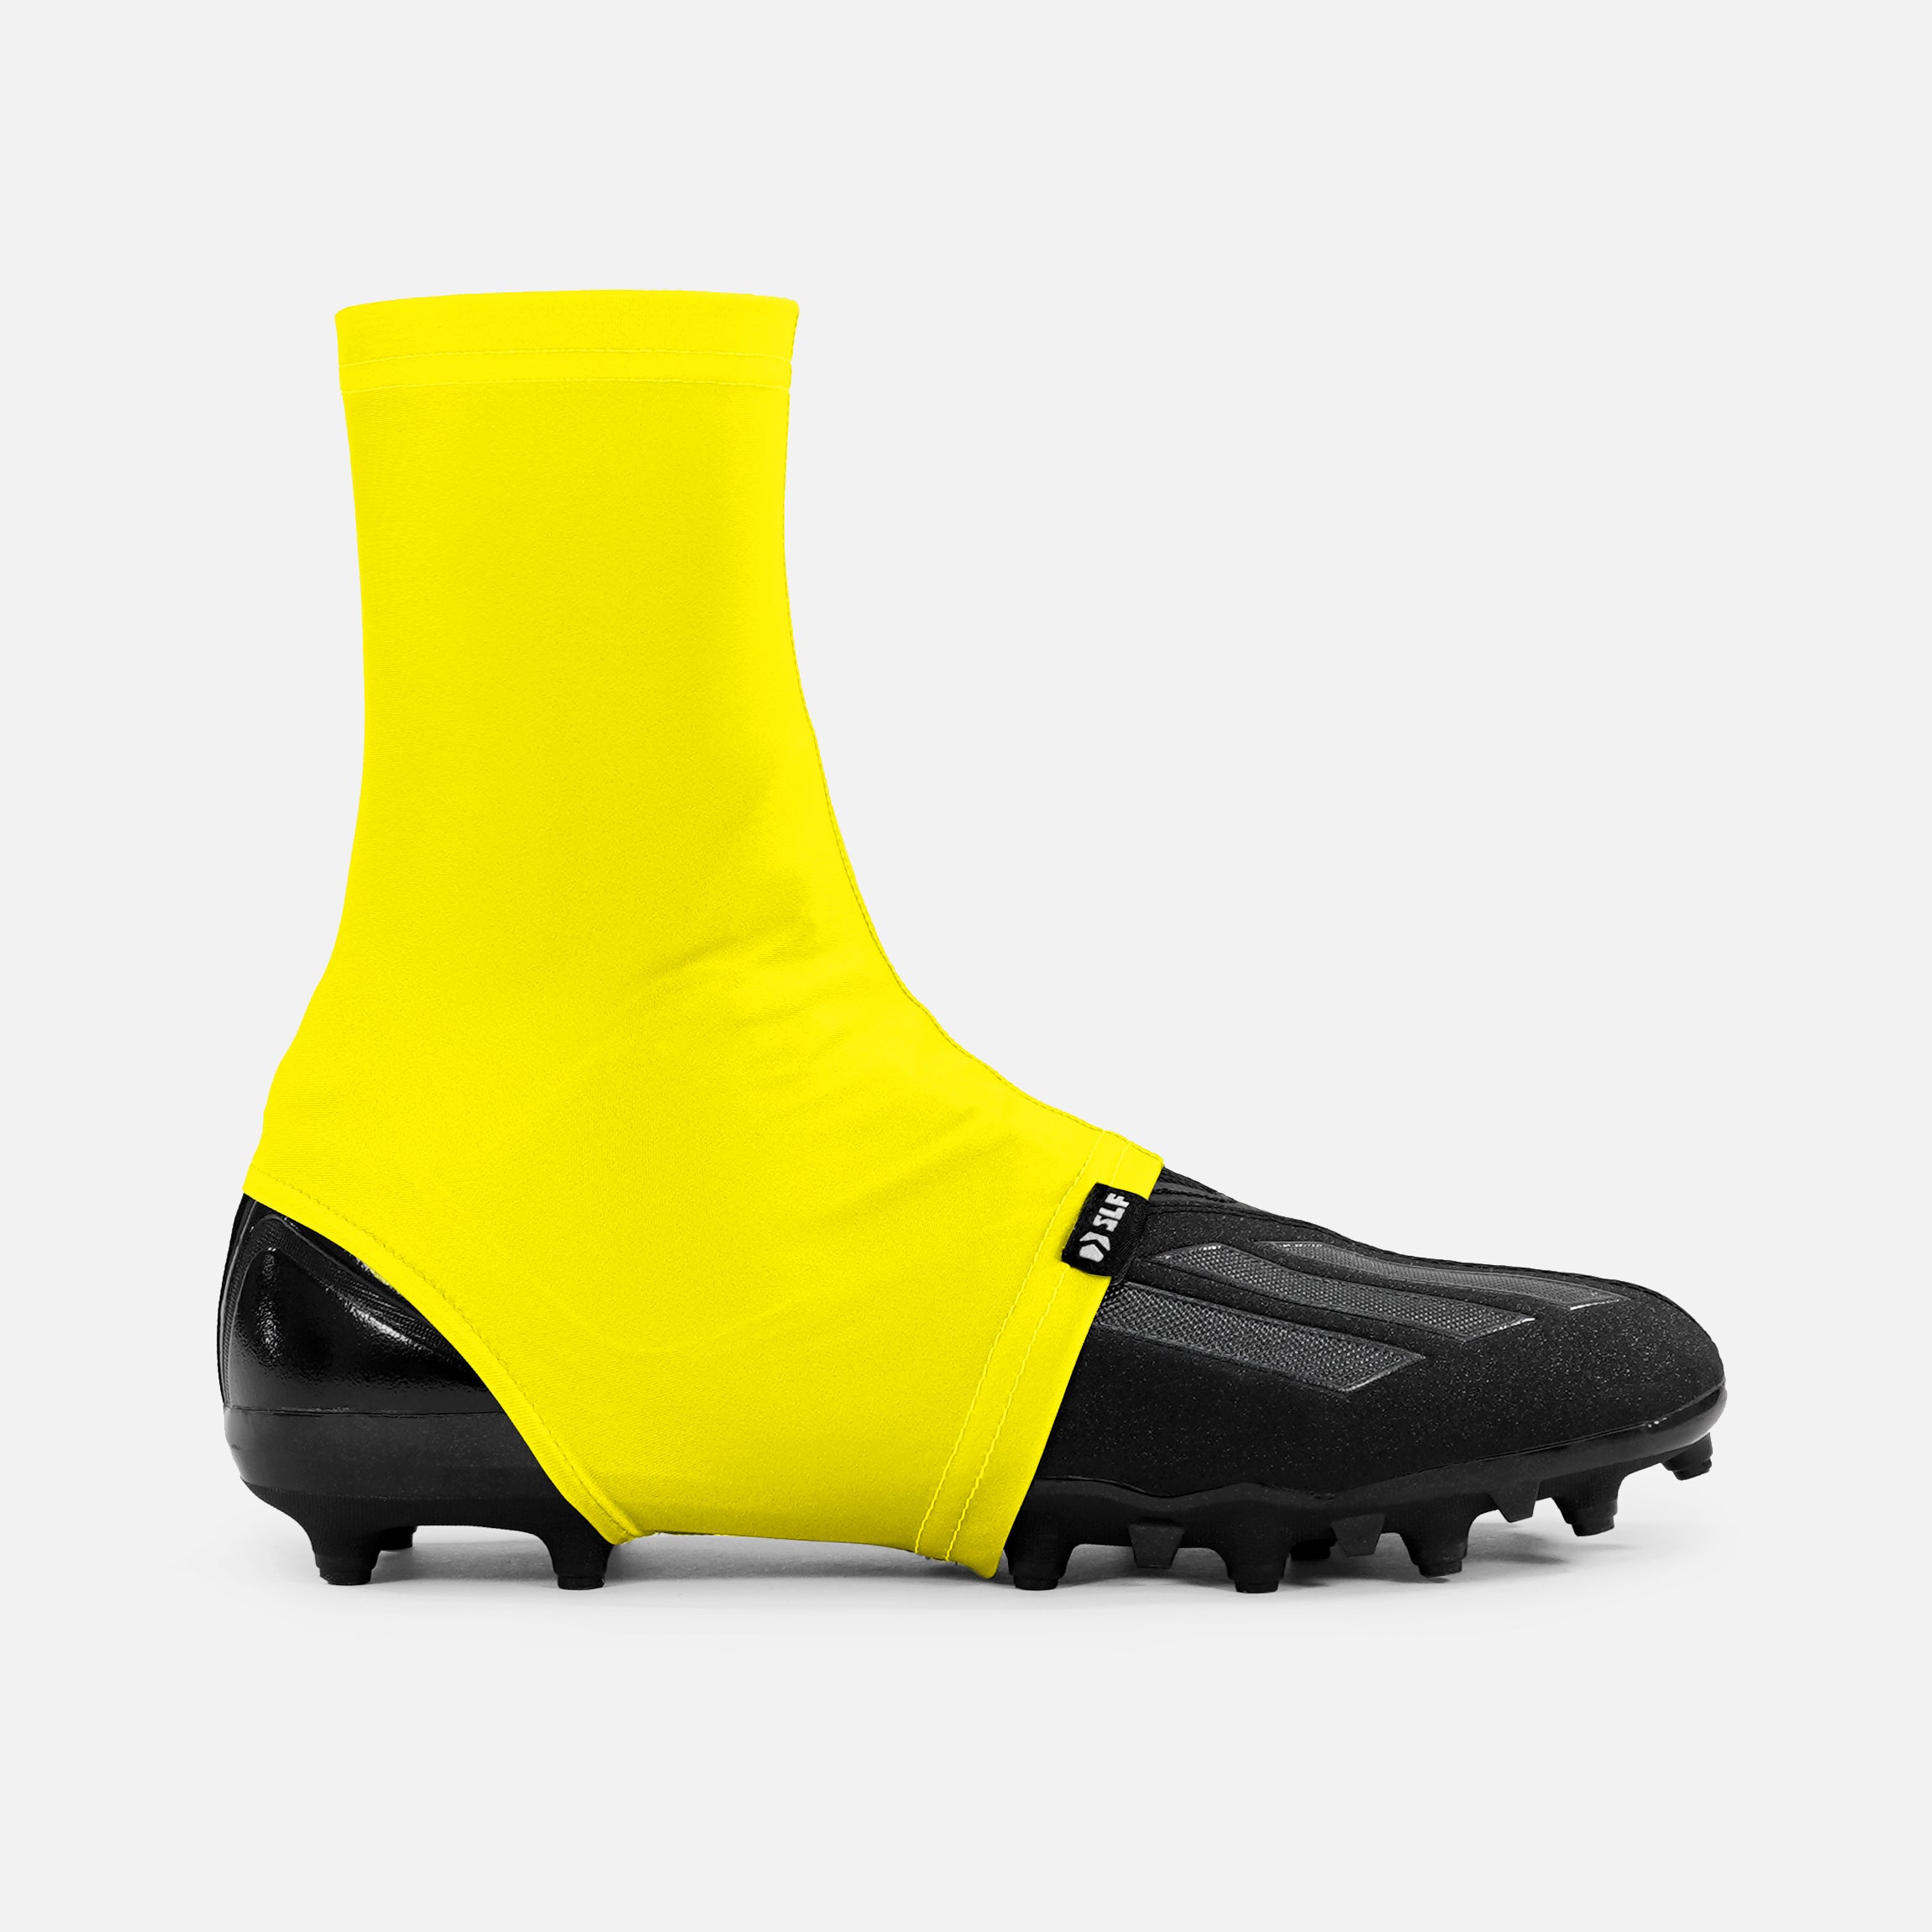 Hue Yellow Spats / Cleat Covers – SLEEFS